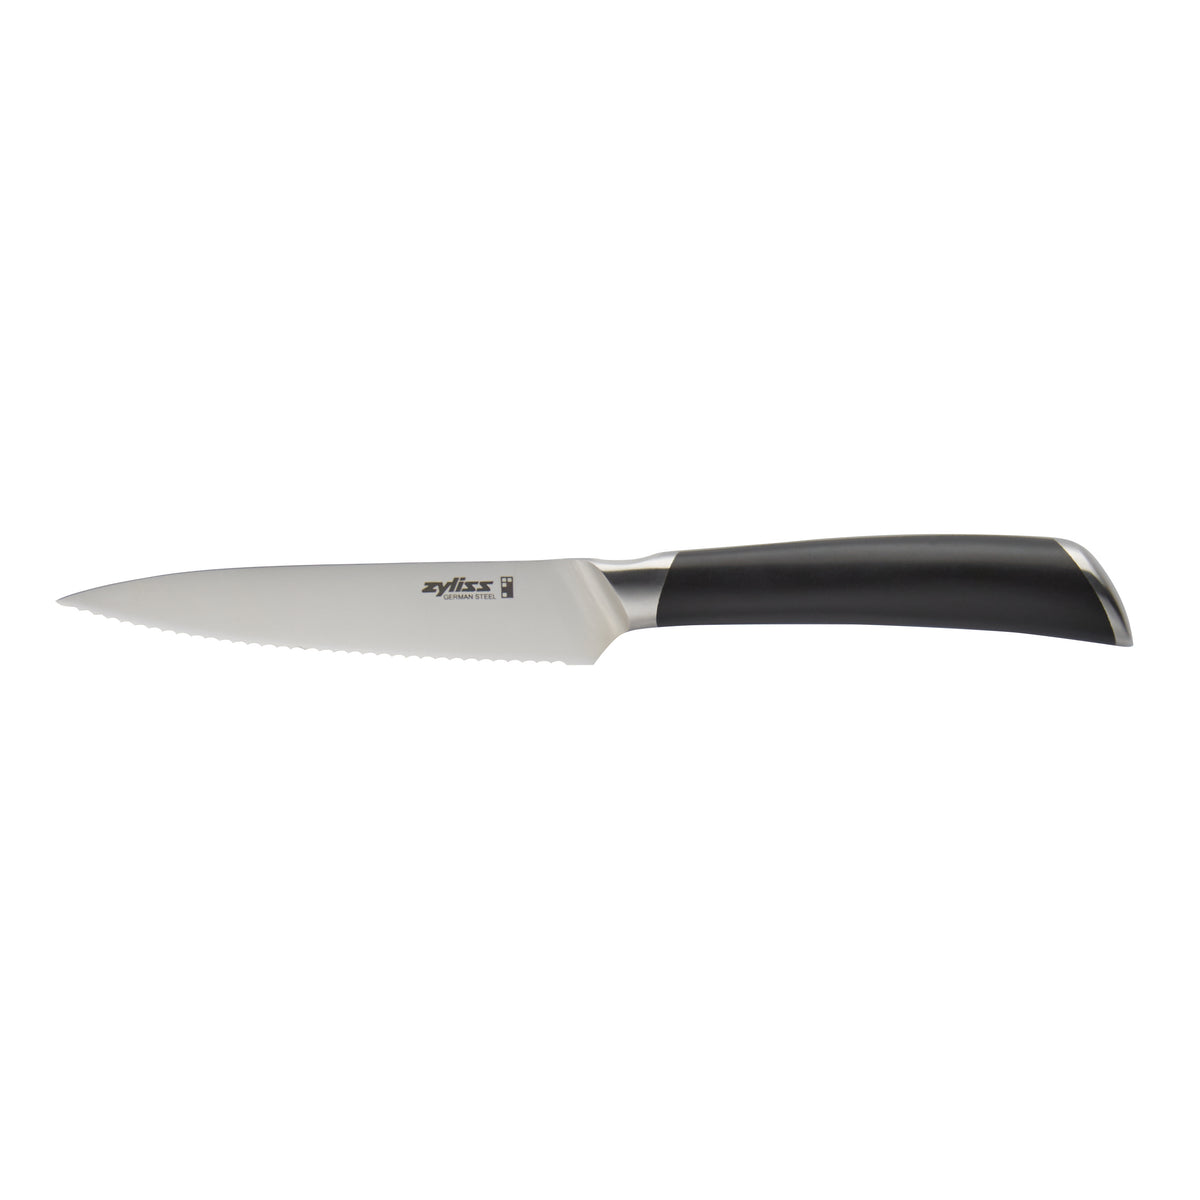 Zyliss® Serrated Stainless Steel Paring Knife, 4 Paring Knife